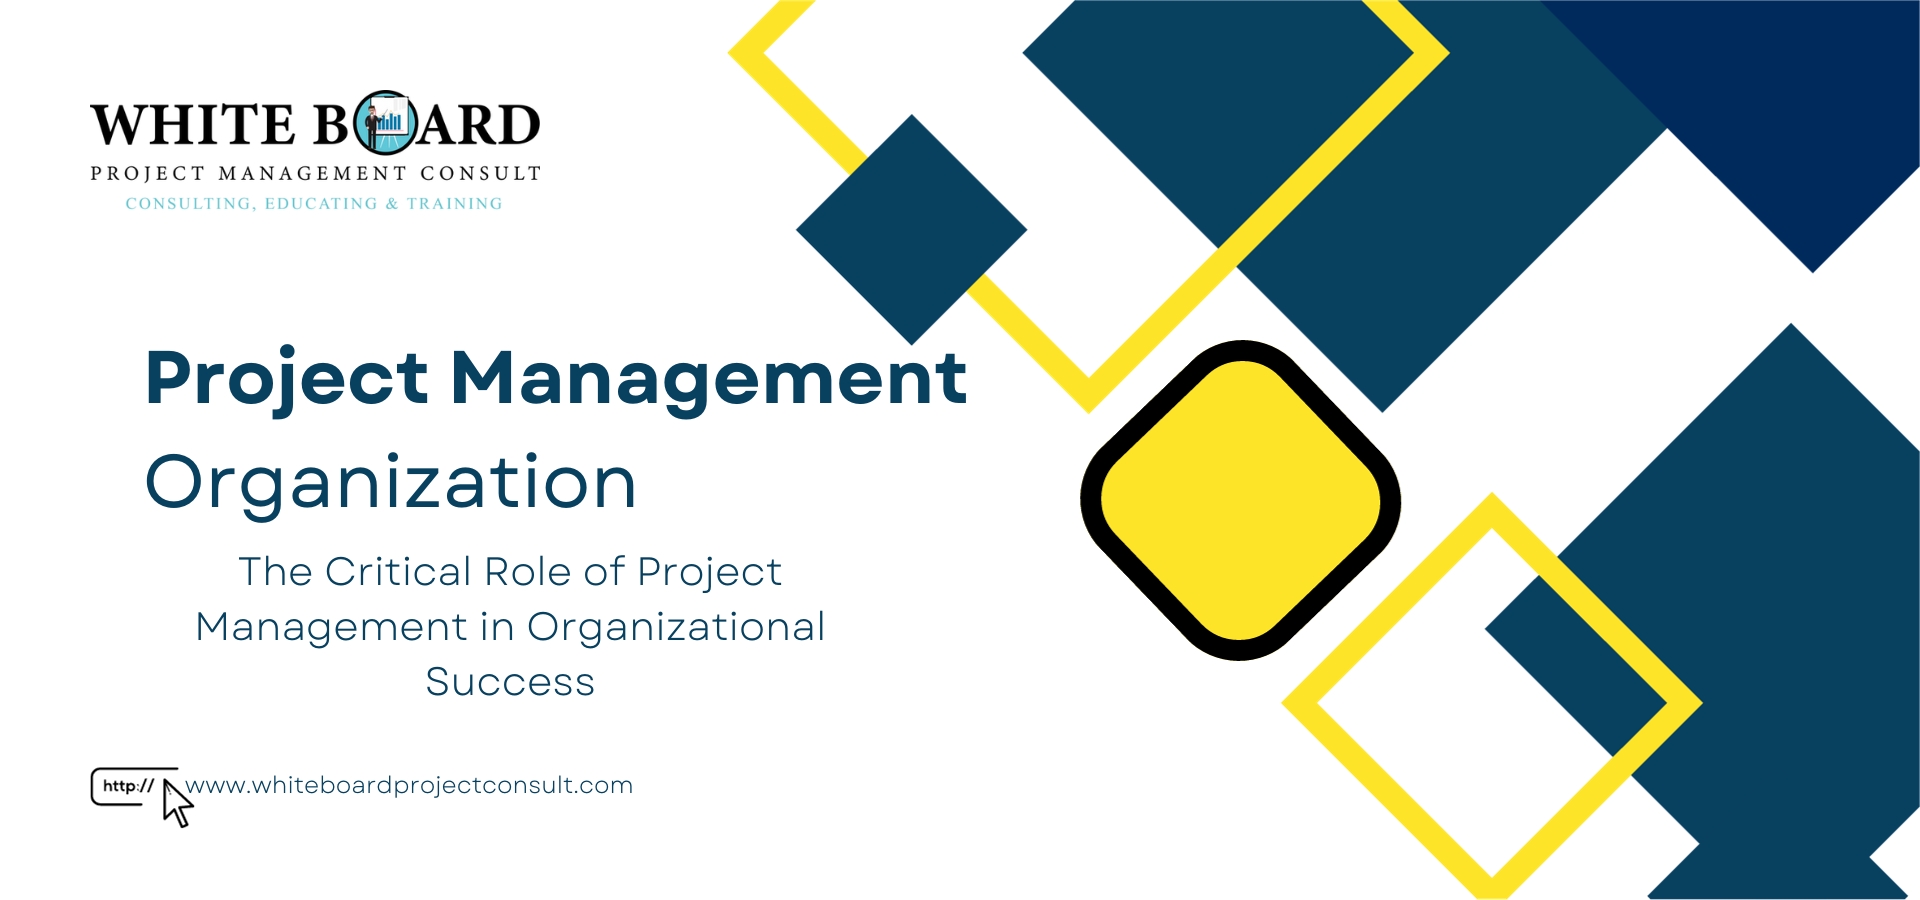 The Critical Role of Project Management in Organizational Success